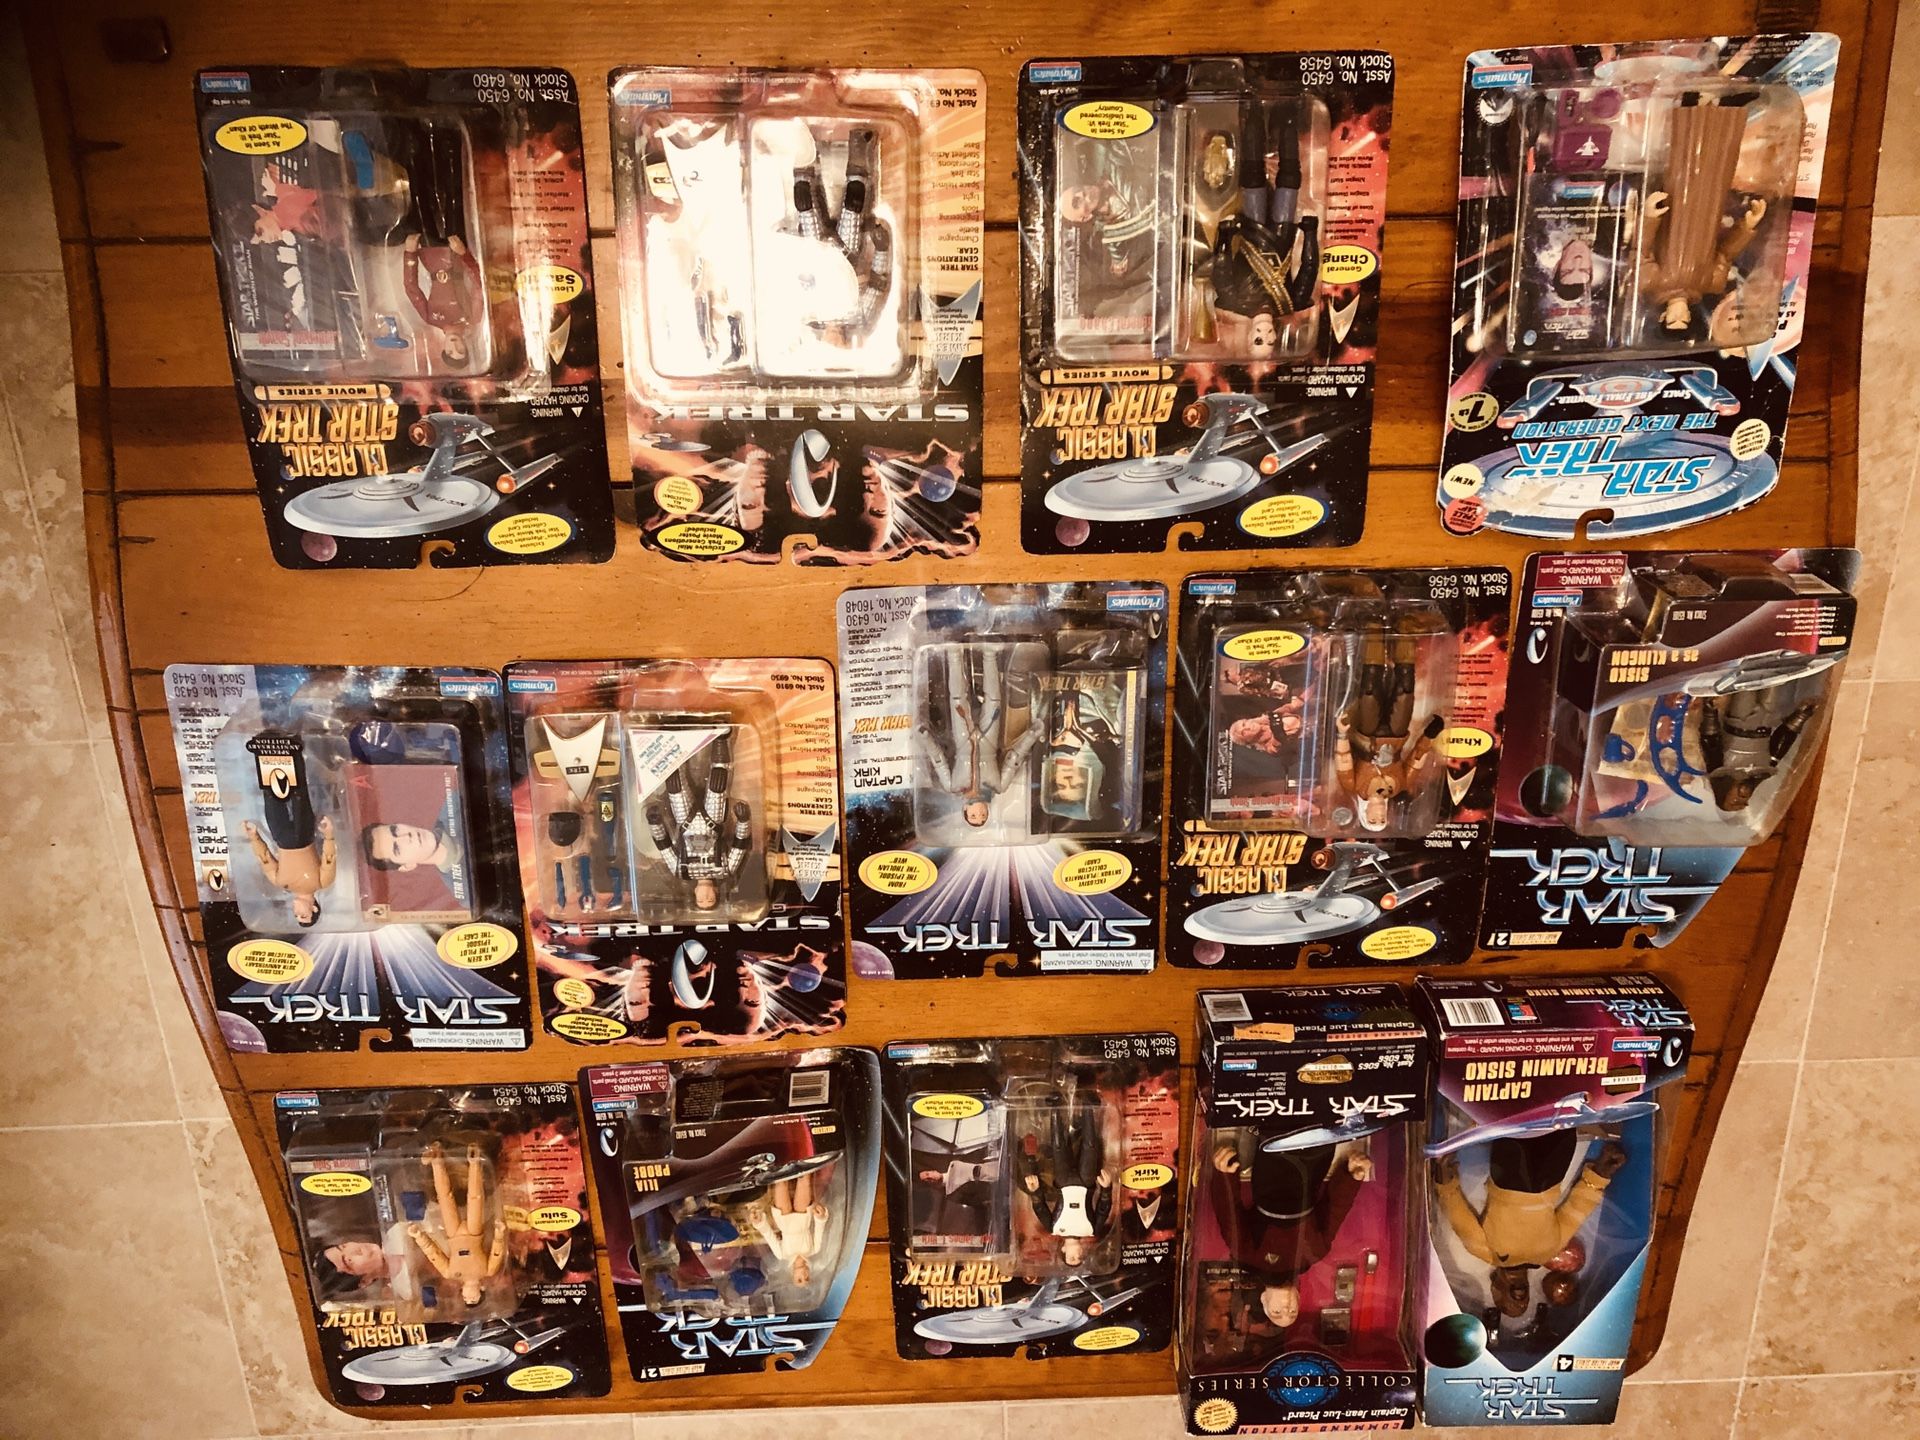 Star Trek Action Figures Collection (14 of them)